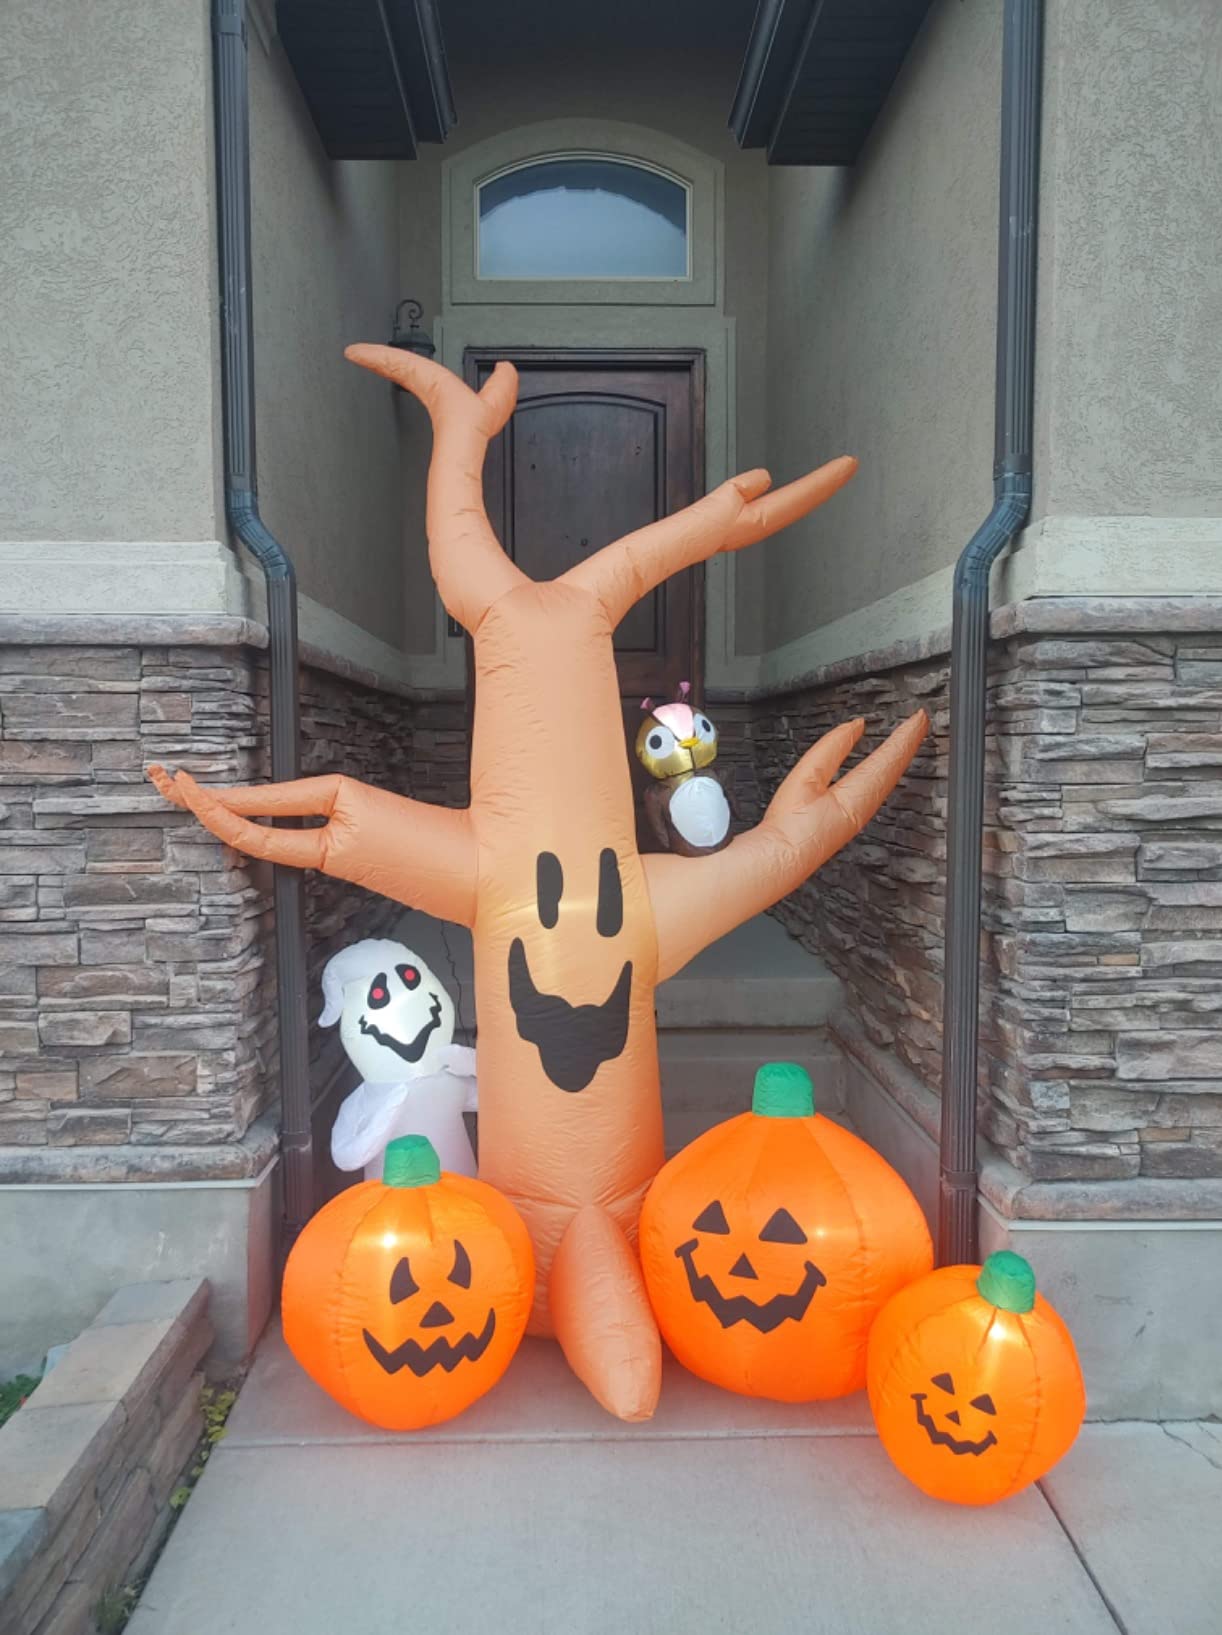 Cool, ghost and pumpkin inflatable